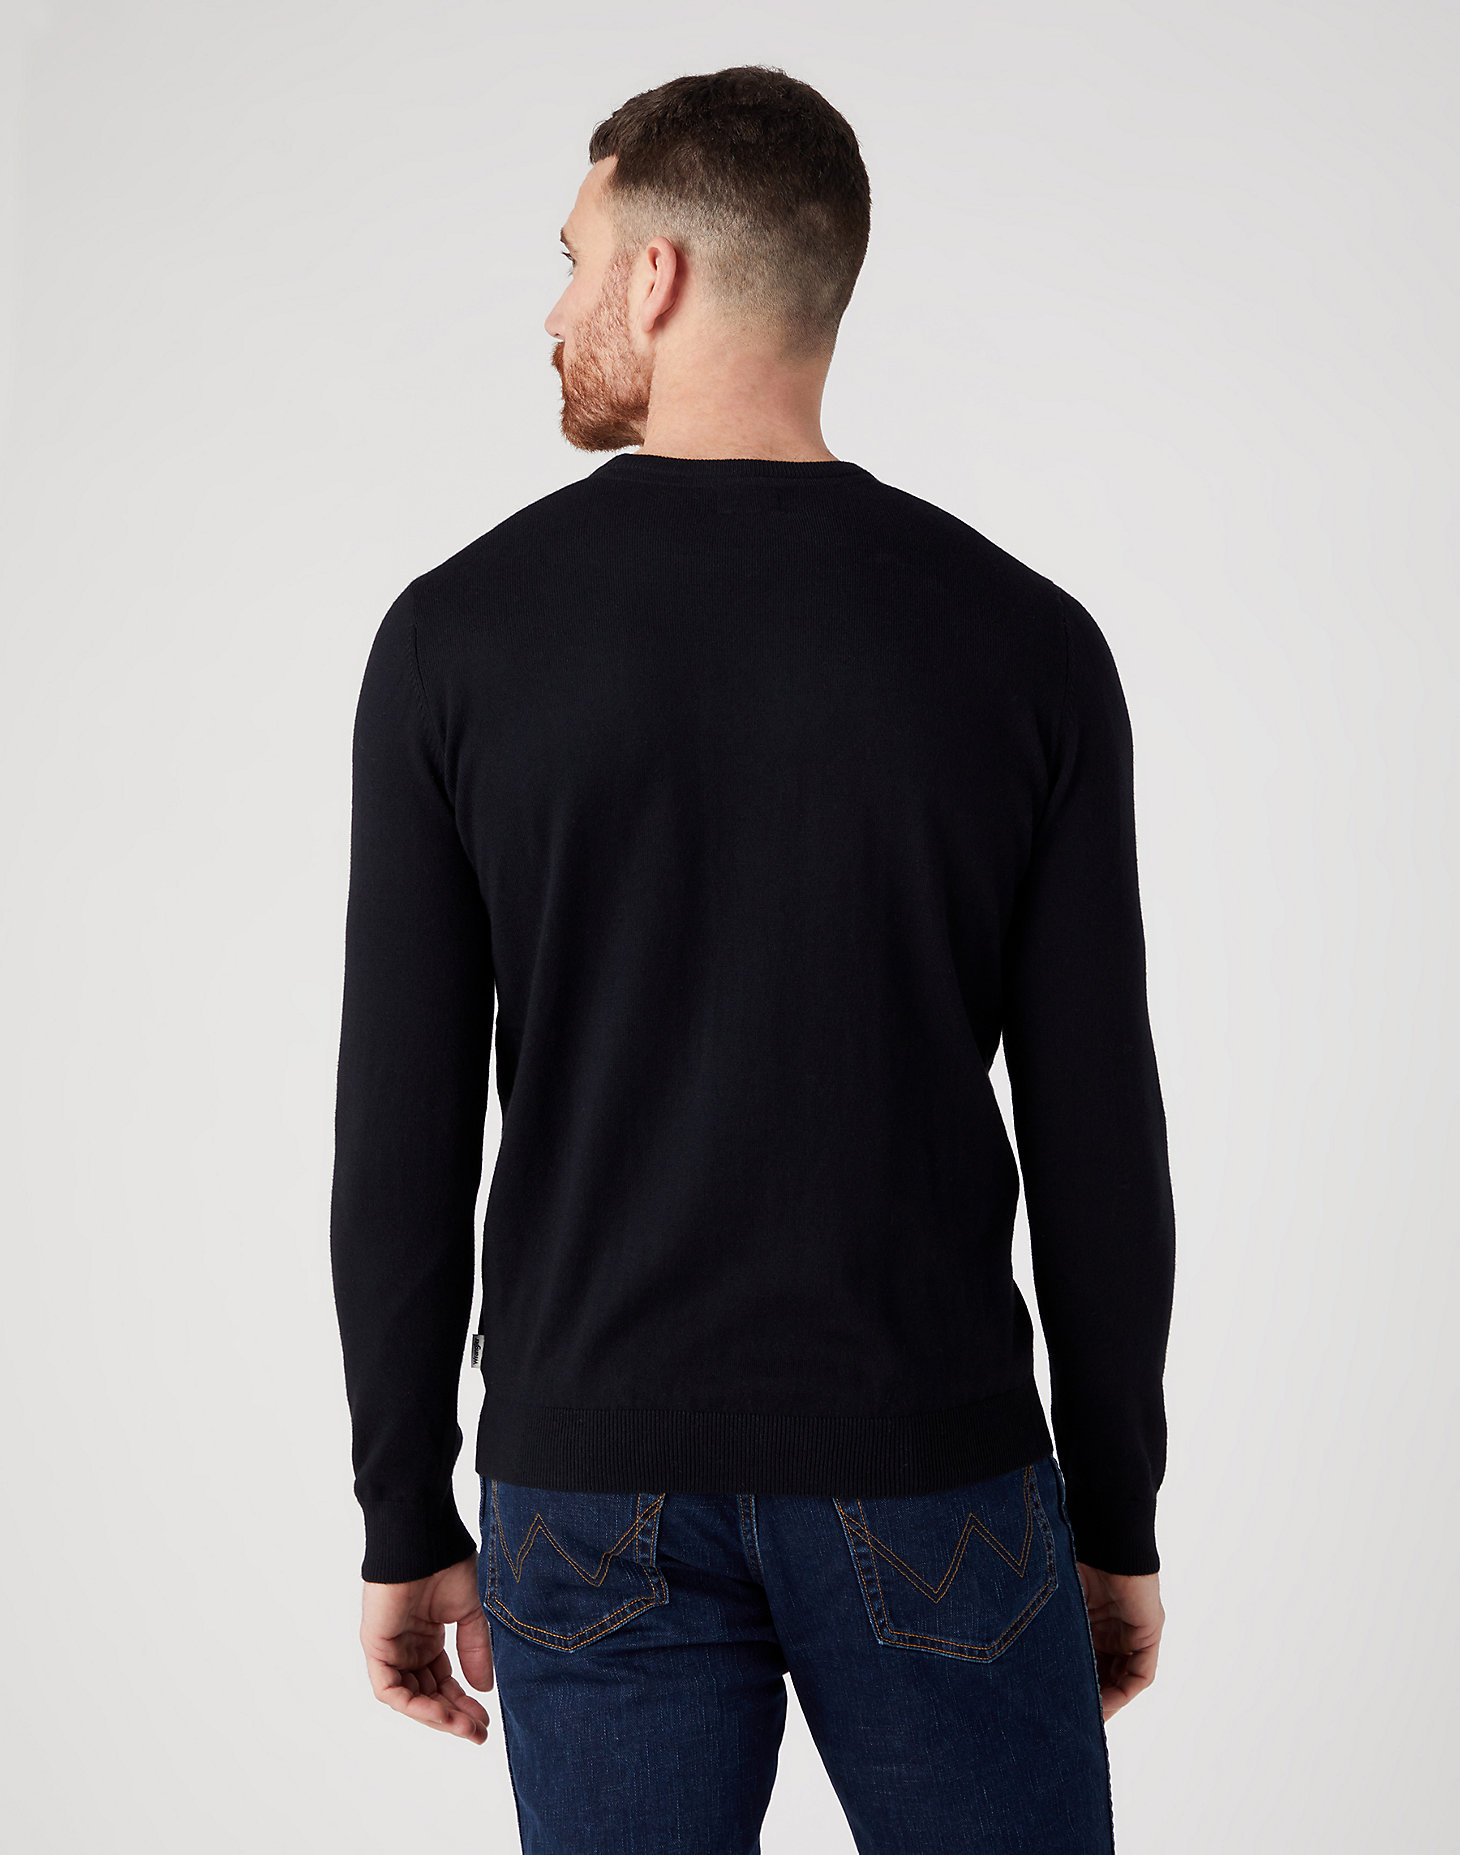 Crewneck Knit in Real Black alternative view 2